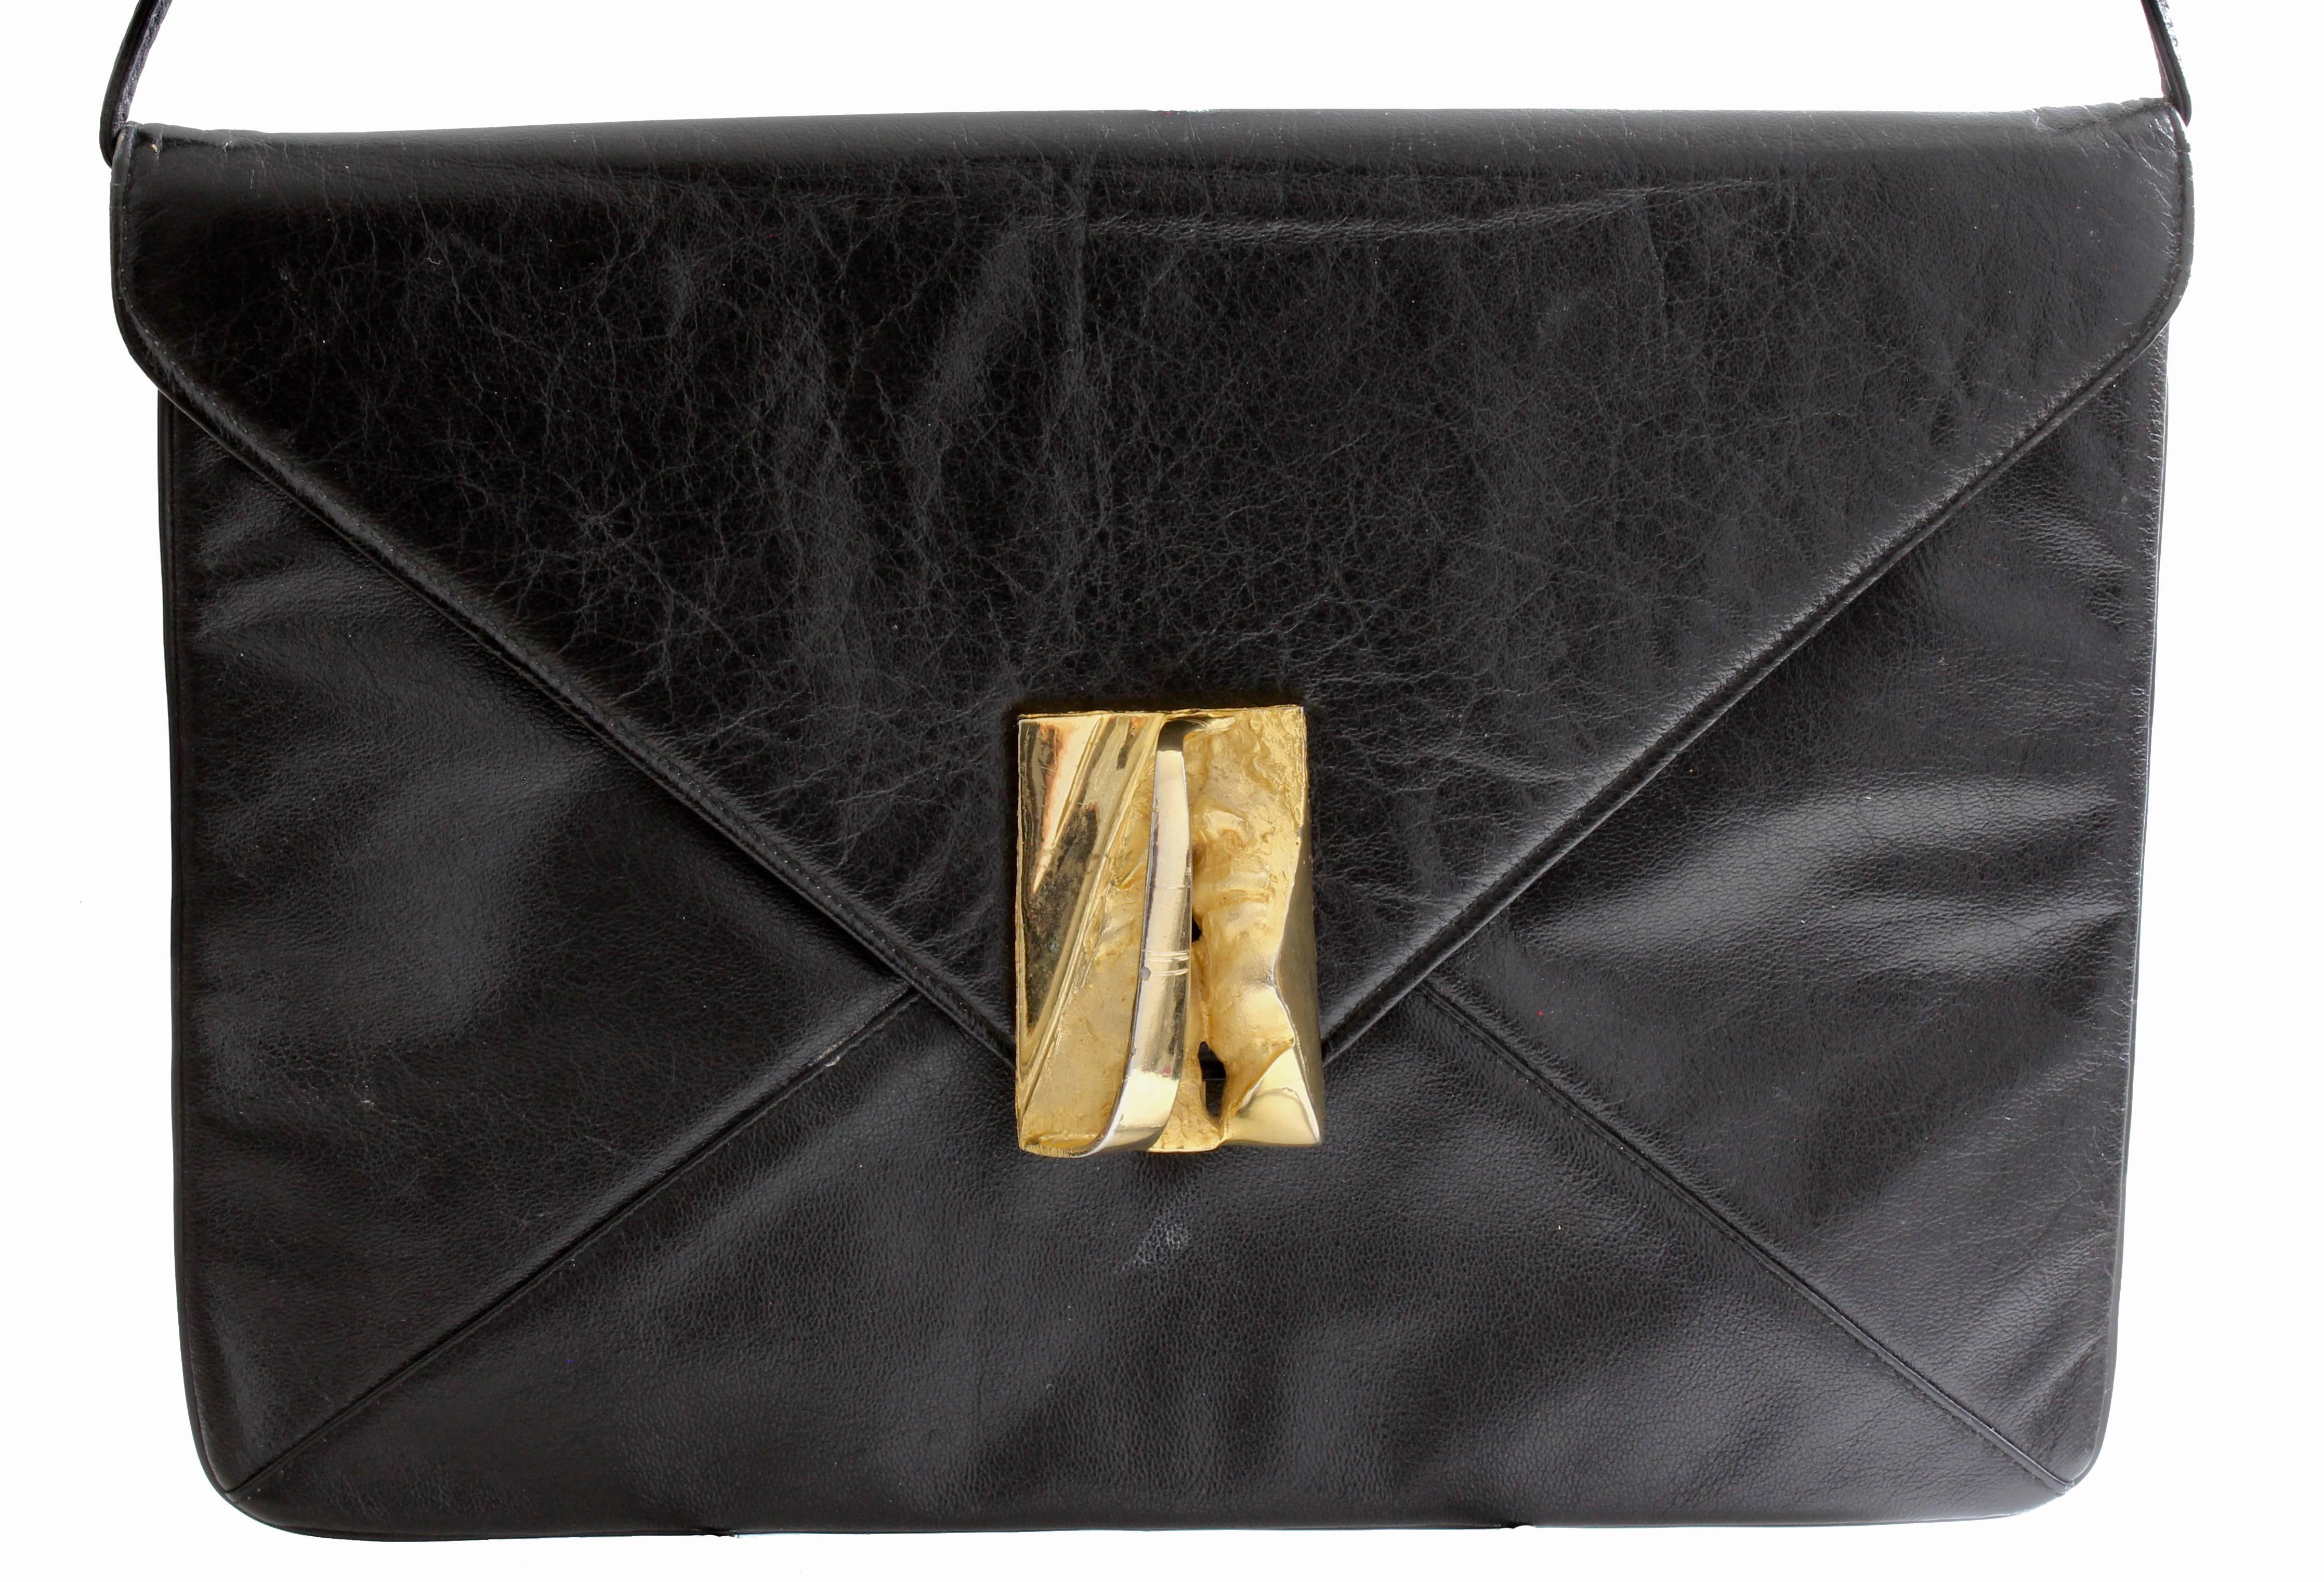 This unusual envelope clutch or shoulder bag was made by Harry Rosenfeld, most likely in the mid 1960s.  Made from black leather, it features a sculpted abstract figural face clasp in gold metal and a removable shoulder strap.  The interior is lined